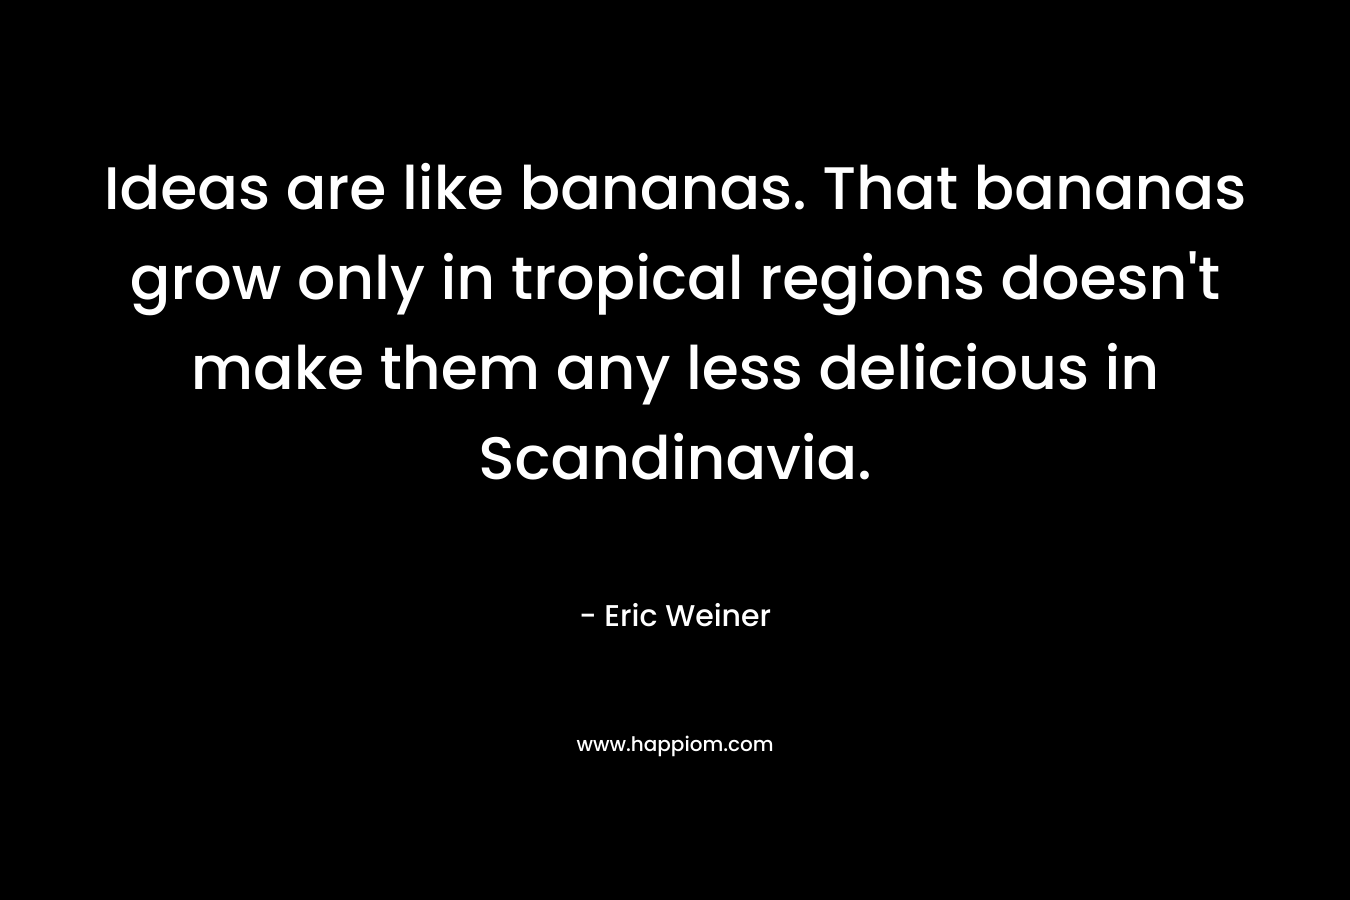 Ideas are like bananas. That bananas grow only in tropical regions doesn’t make them any less delicious in Scandinavia. – Eric Weiner